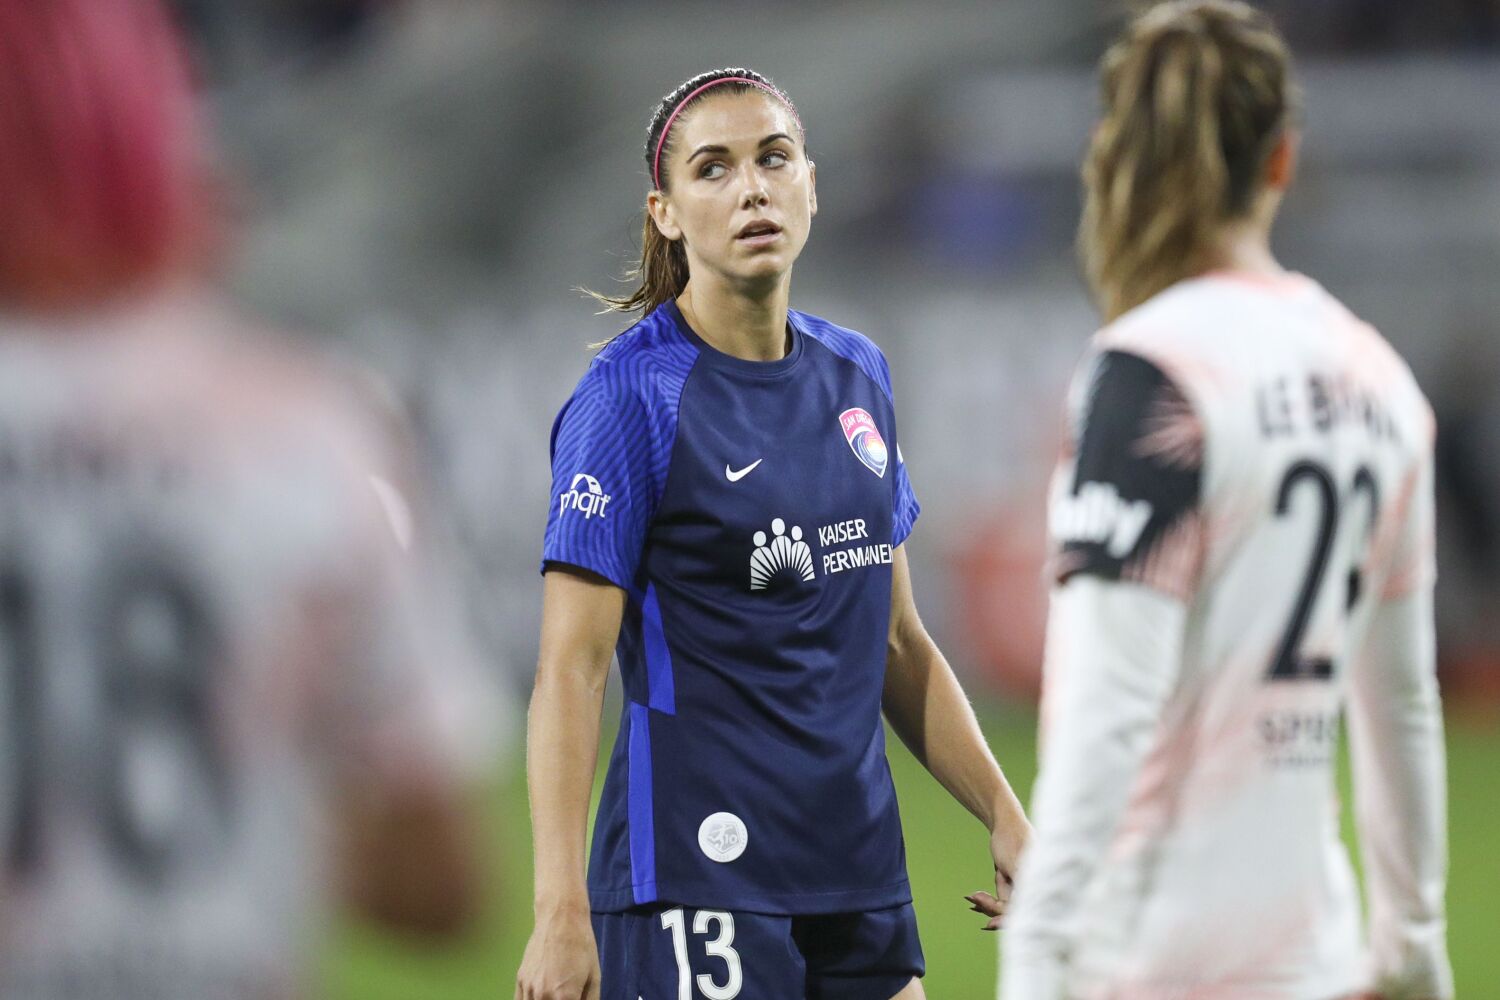 San Diego Wave FC may face Chicago Red Stars without Morgan in